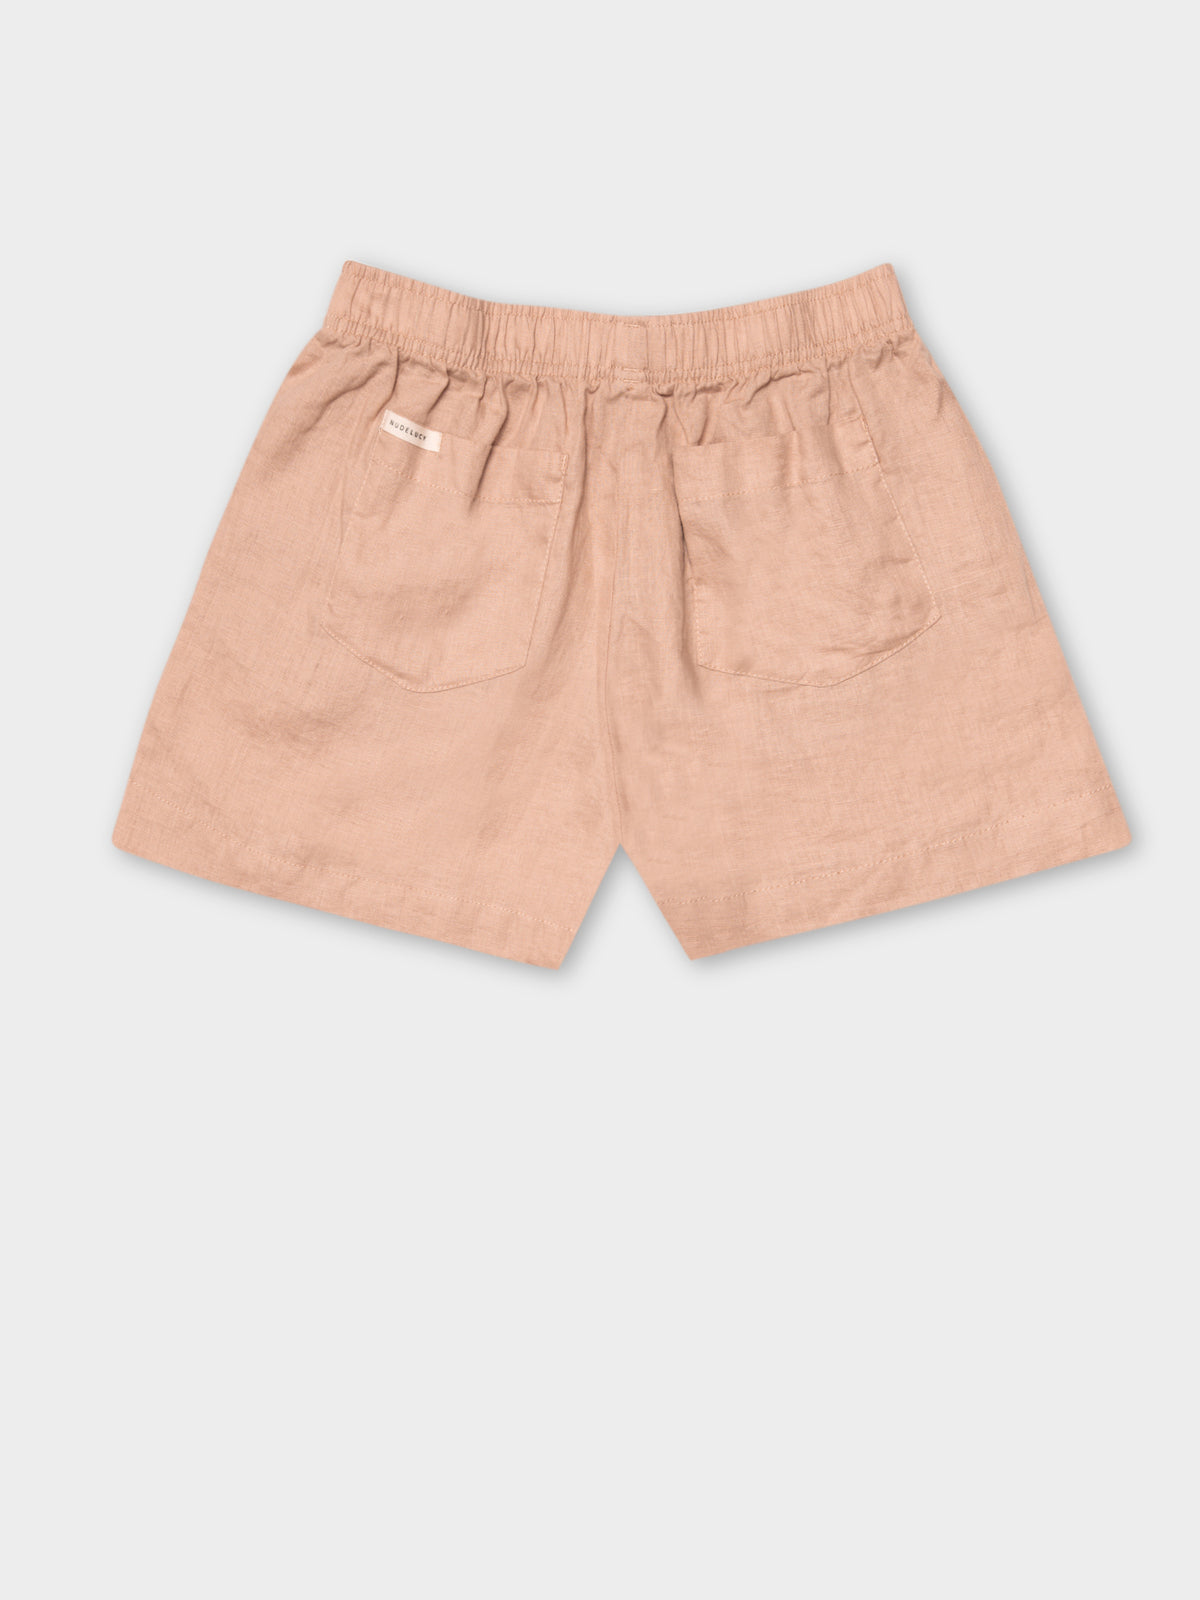 Nude Linen Lounge Short in Clay Pink